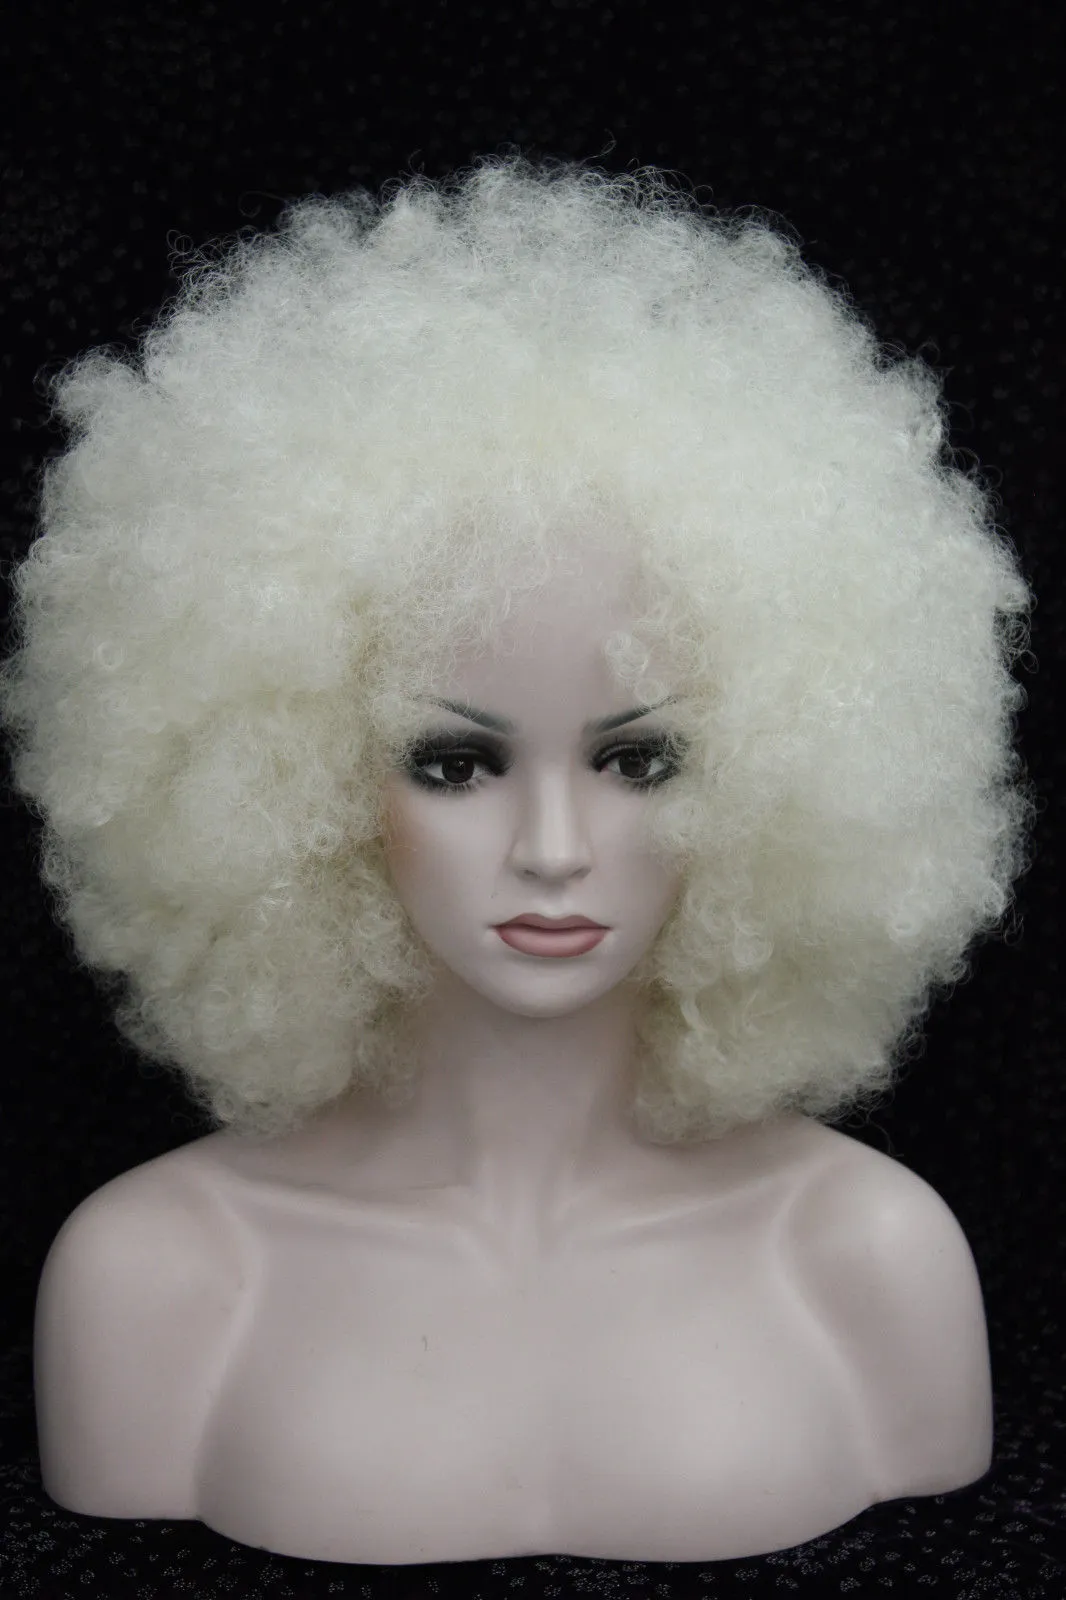 beautiful charming hot New Fashion CURLY AFRO WIG CIRCUS CLOWN UNISEX FANCY DRESS FOOTBALL SPORT WIG select